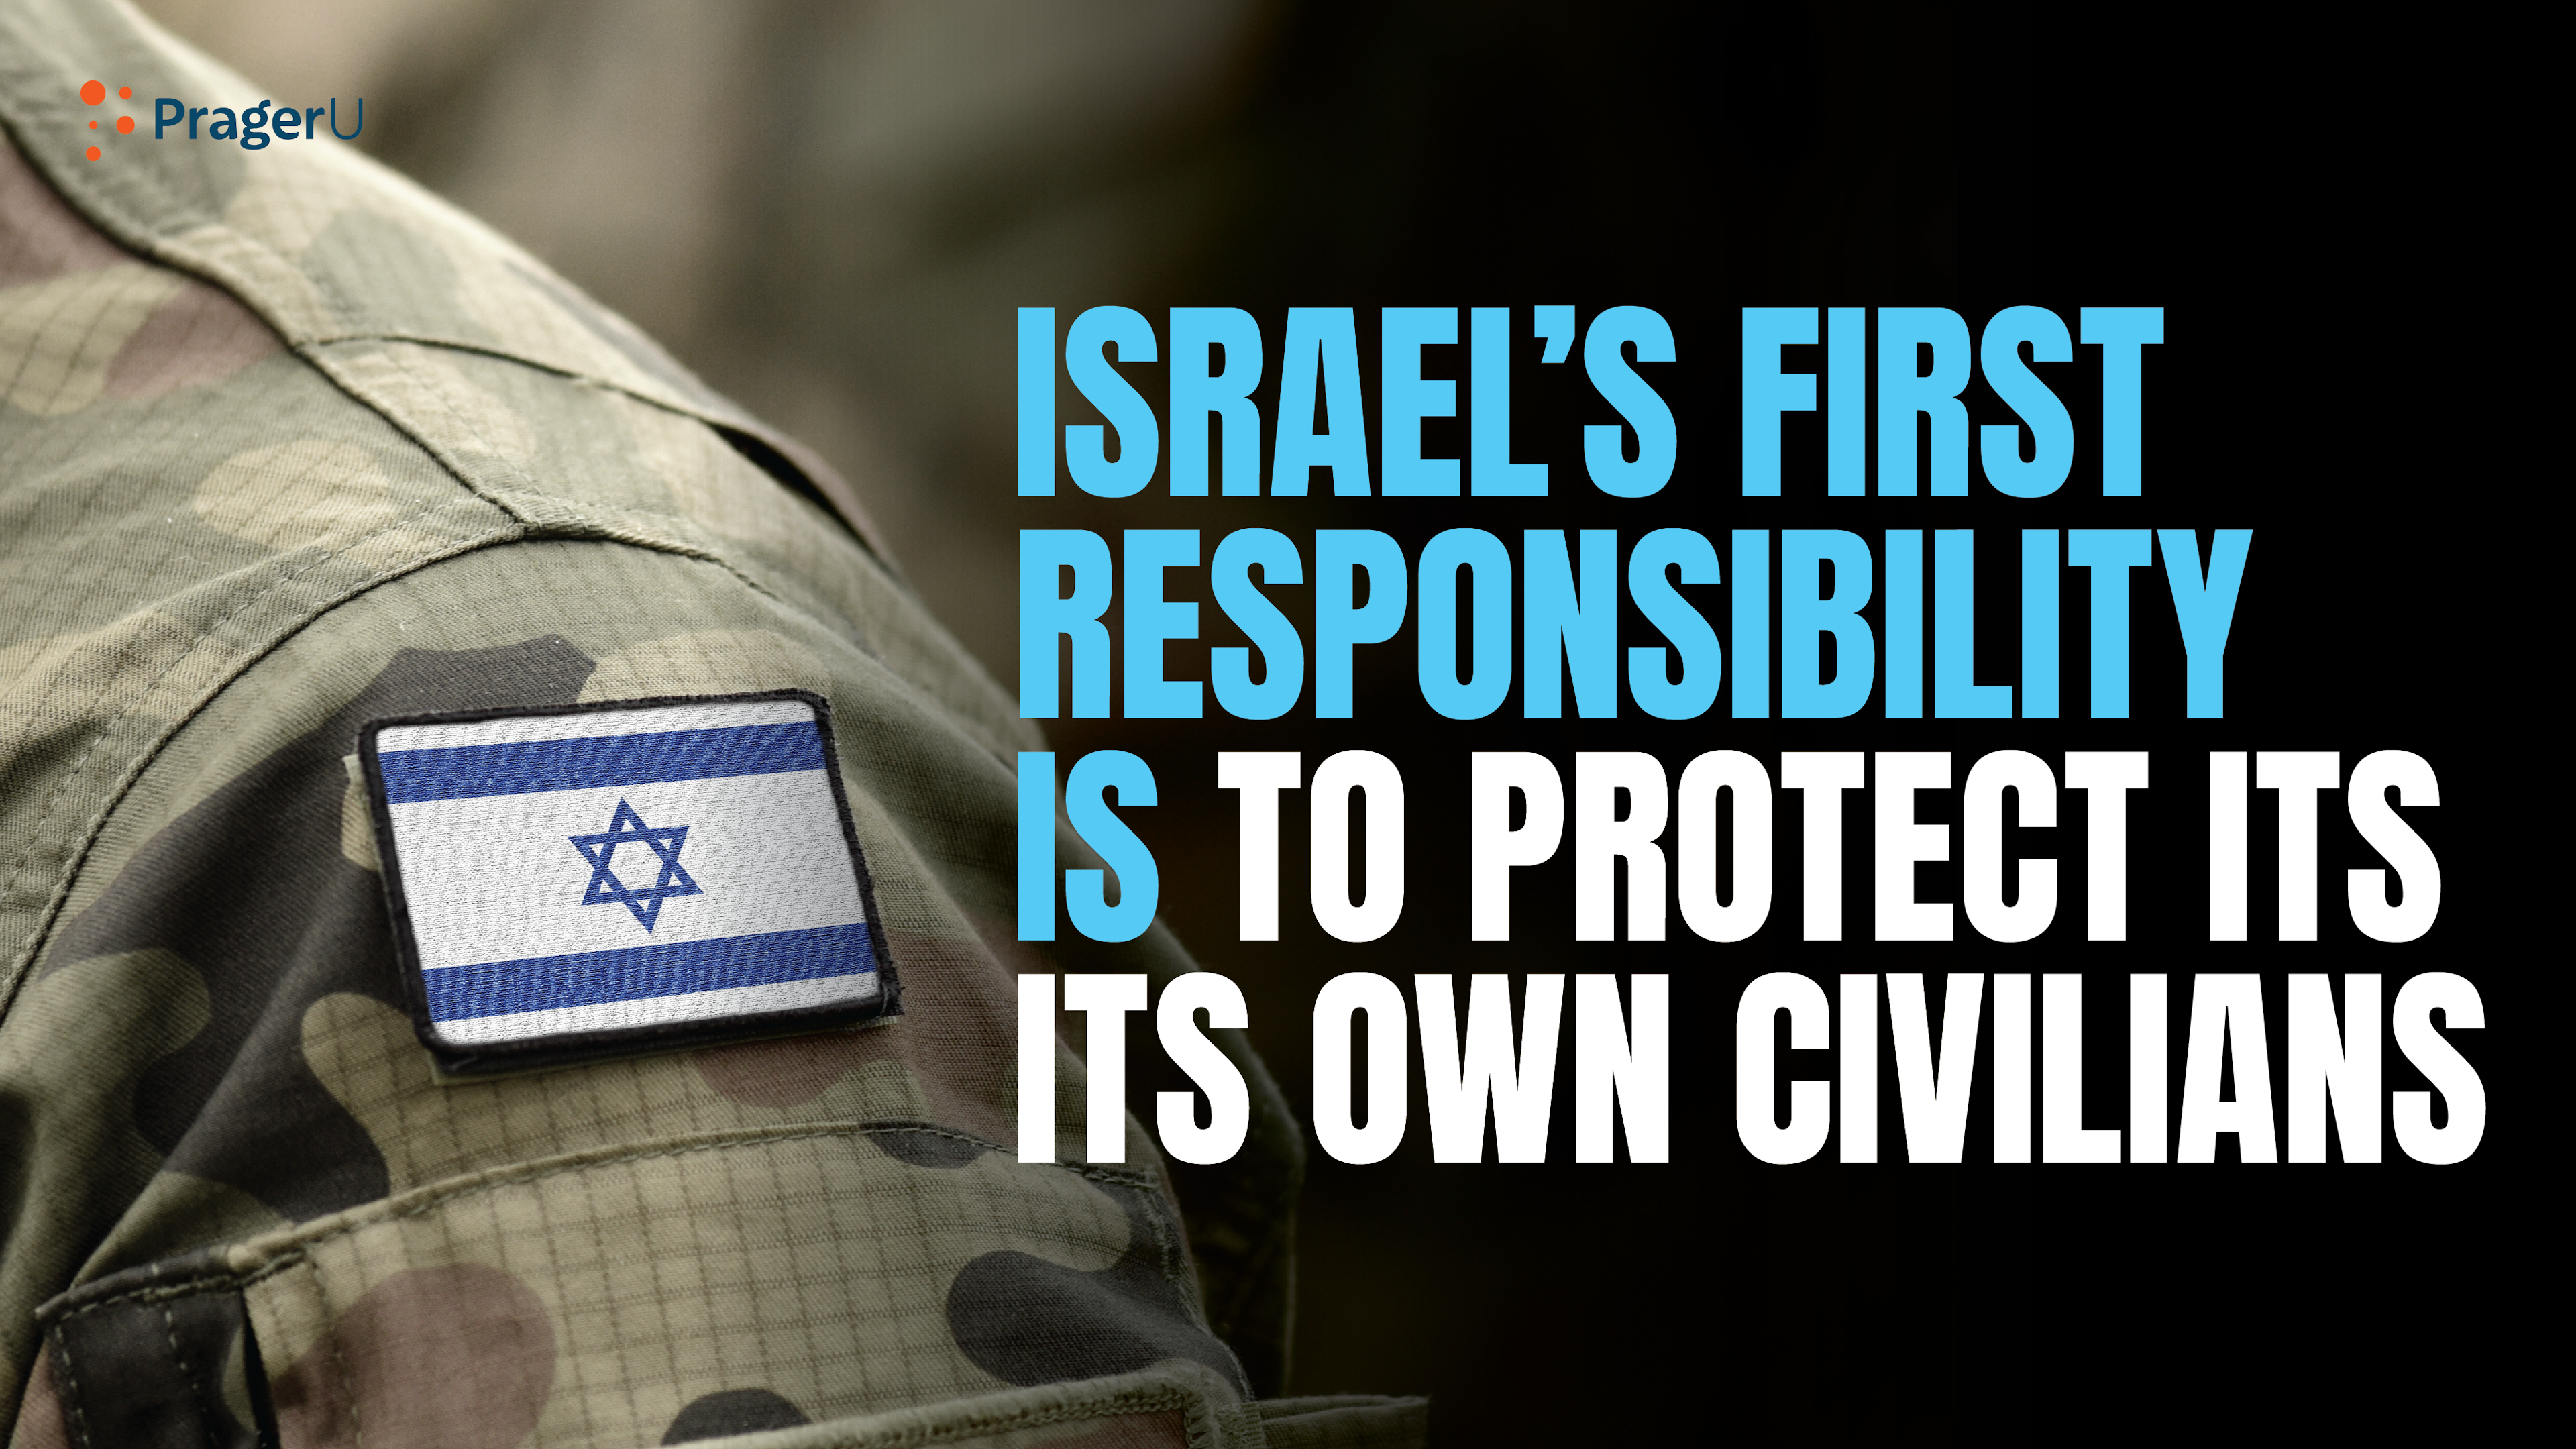 Israel’s First Responsibility Is to Protect Its Own Civilians